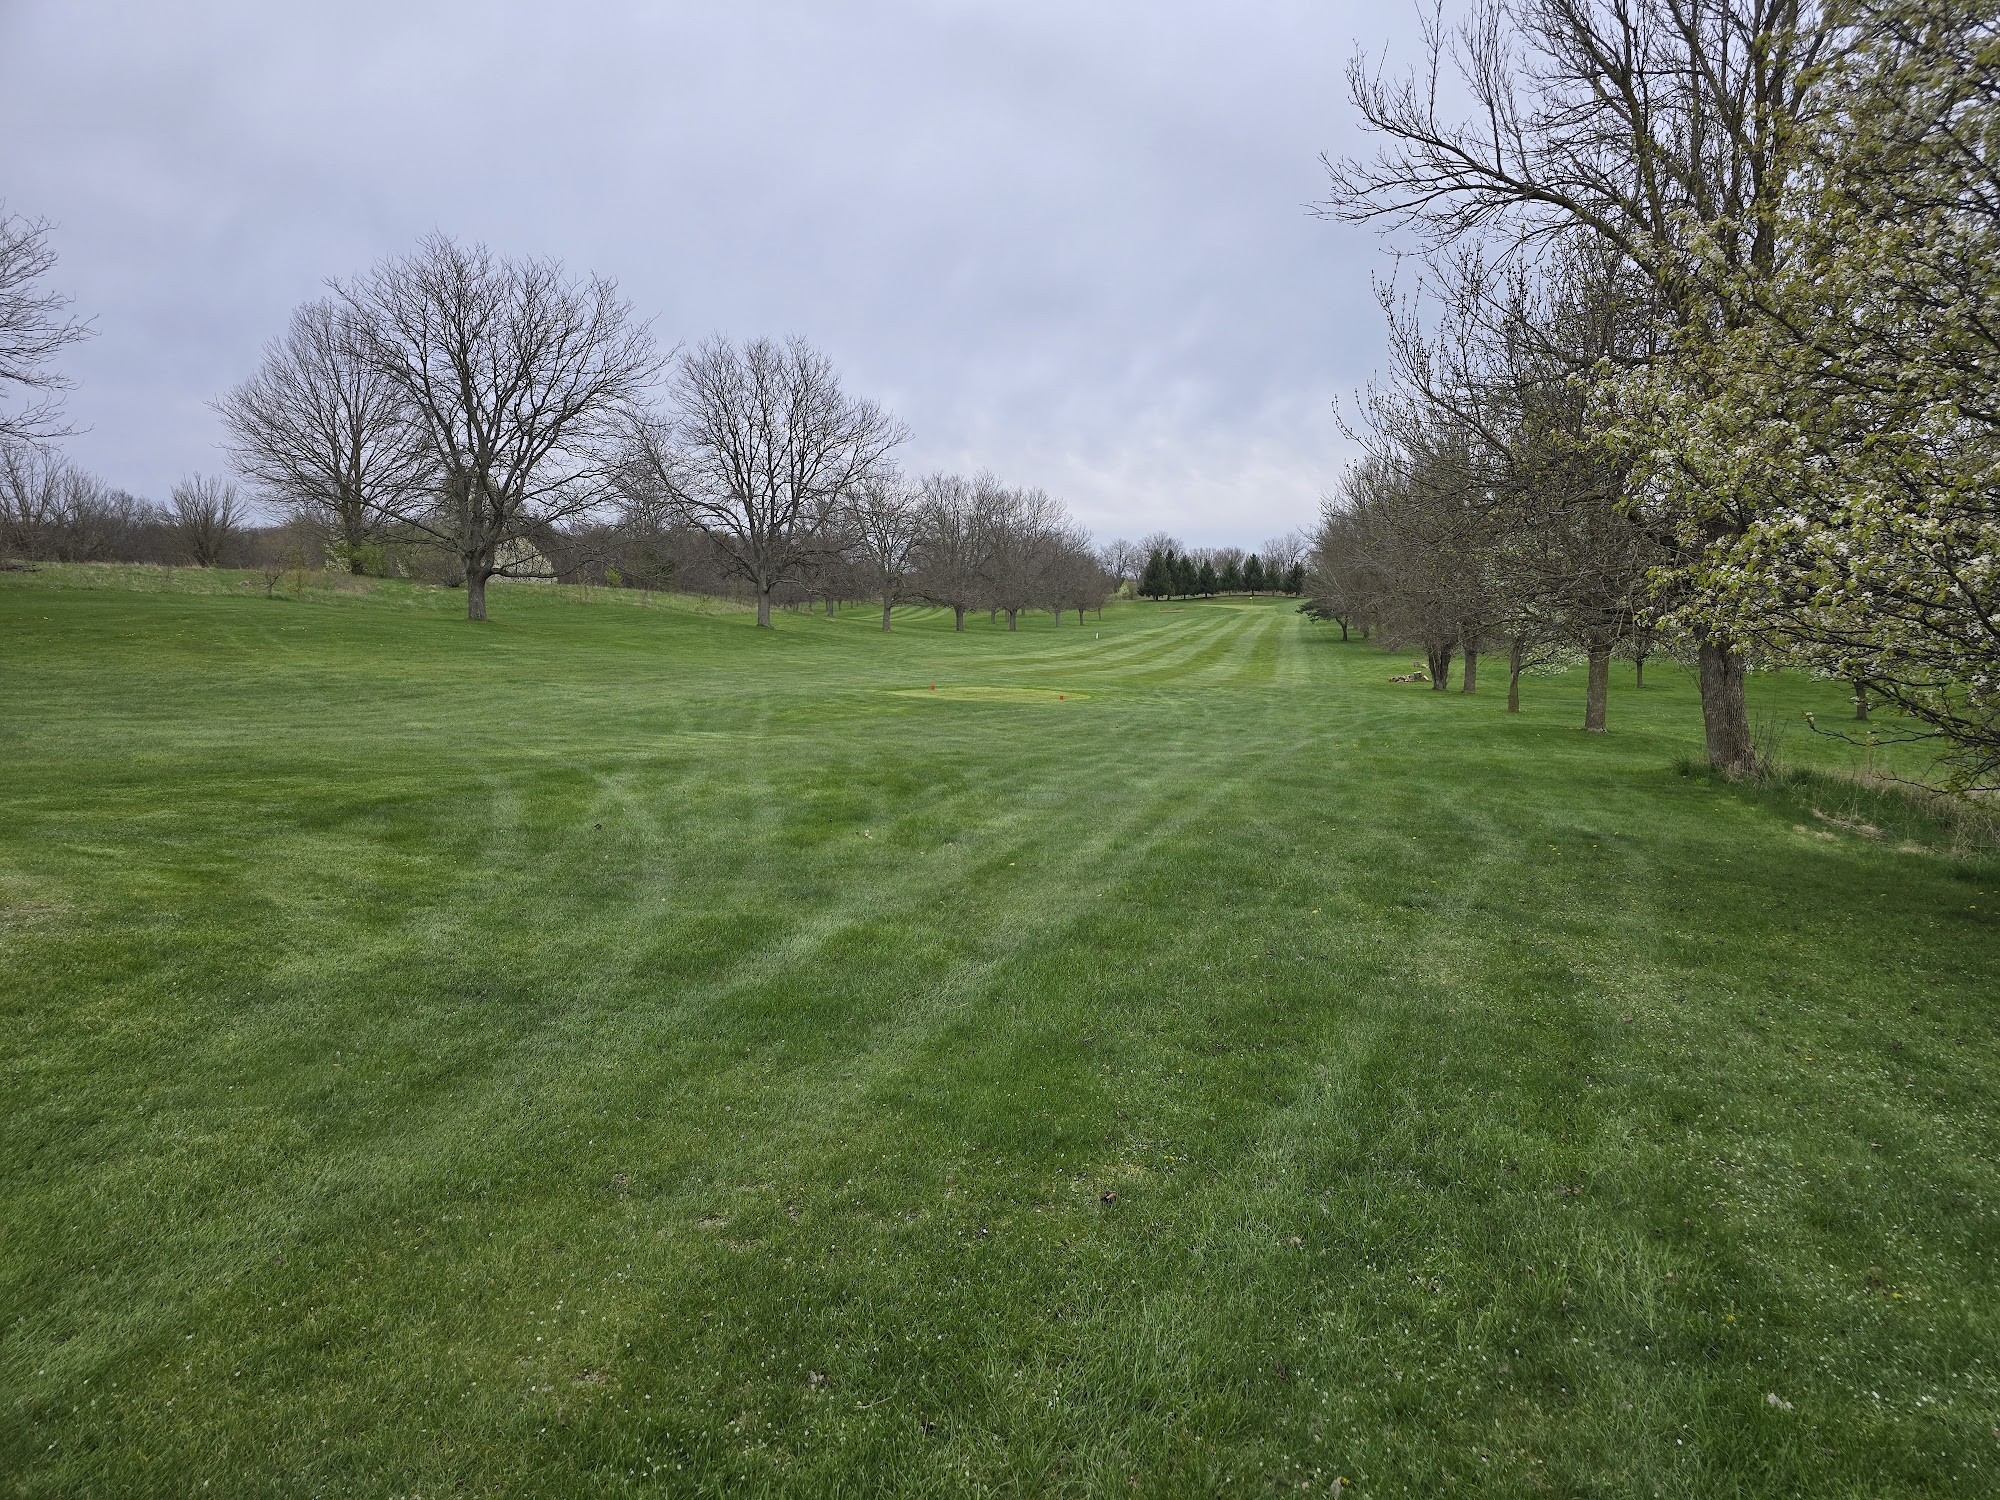 Prairie Creek Golf Course and Banquet Center open weather permitting